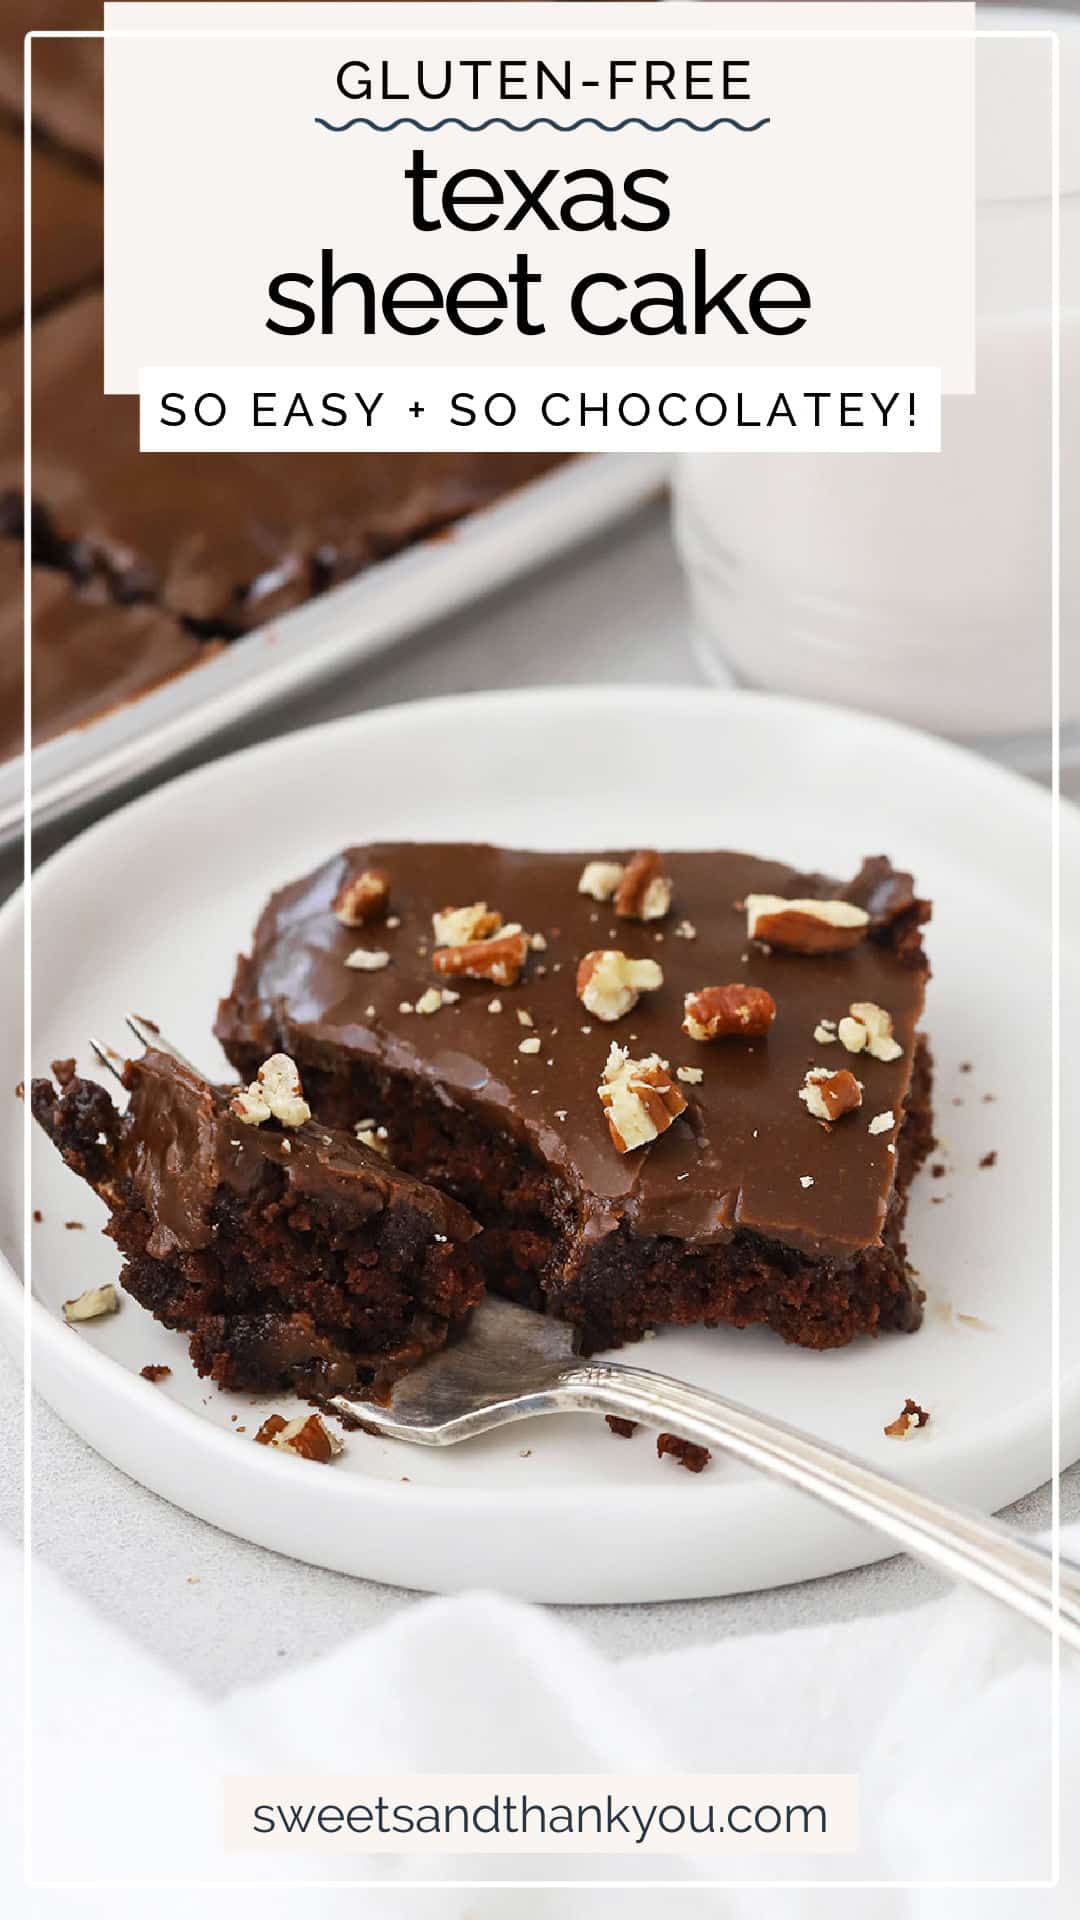 Gluten-Free Texas Sheet Cake - This is the gluten-free Texas chocolate sheet cake recipe you've been waiting for! All the classic chocolate flavor & delicious texture you love--just made gluten-free! // easy gluten free chocolate sheet cake recipe // gluten free chocolate cake recipe // gluten free chocolate cake with chocolate frosting // easy gluten free cake recipe // gluten free texas sheet cake with pecans // gluten free texas sheet cake without pecans